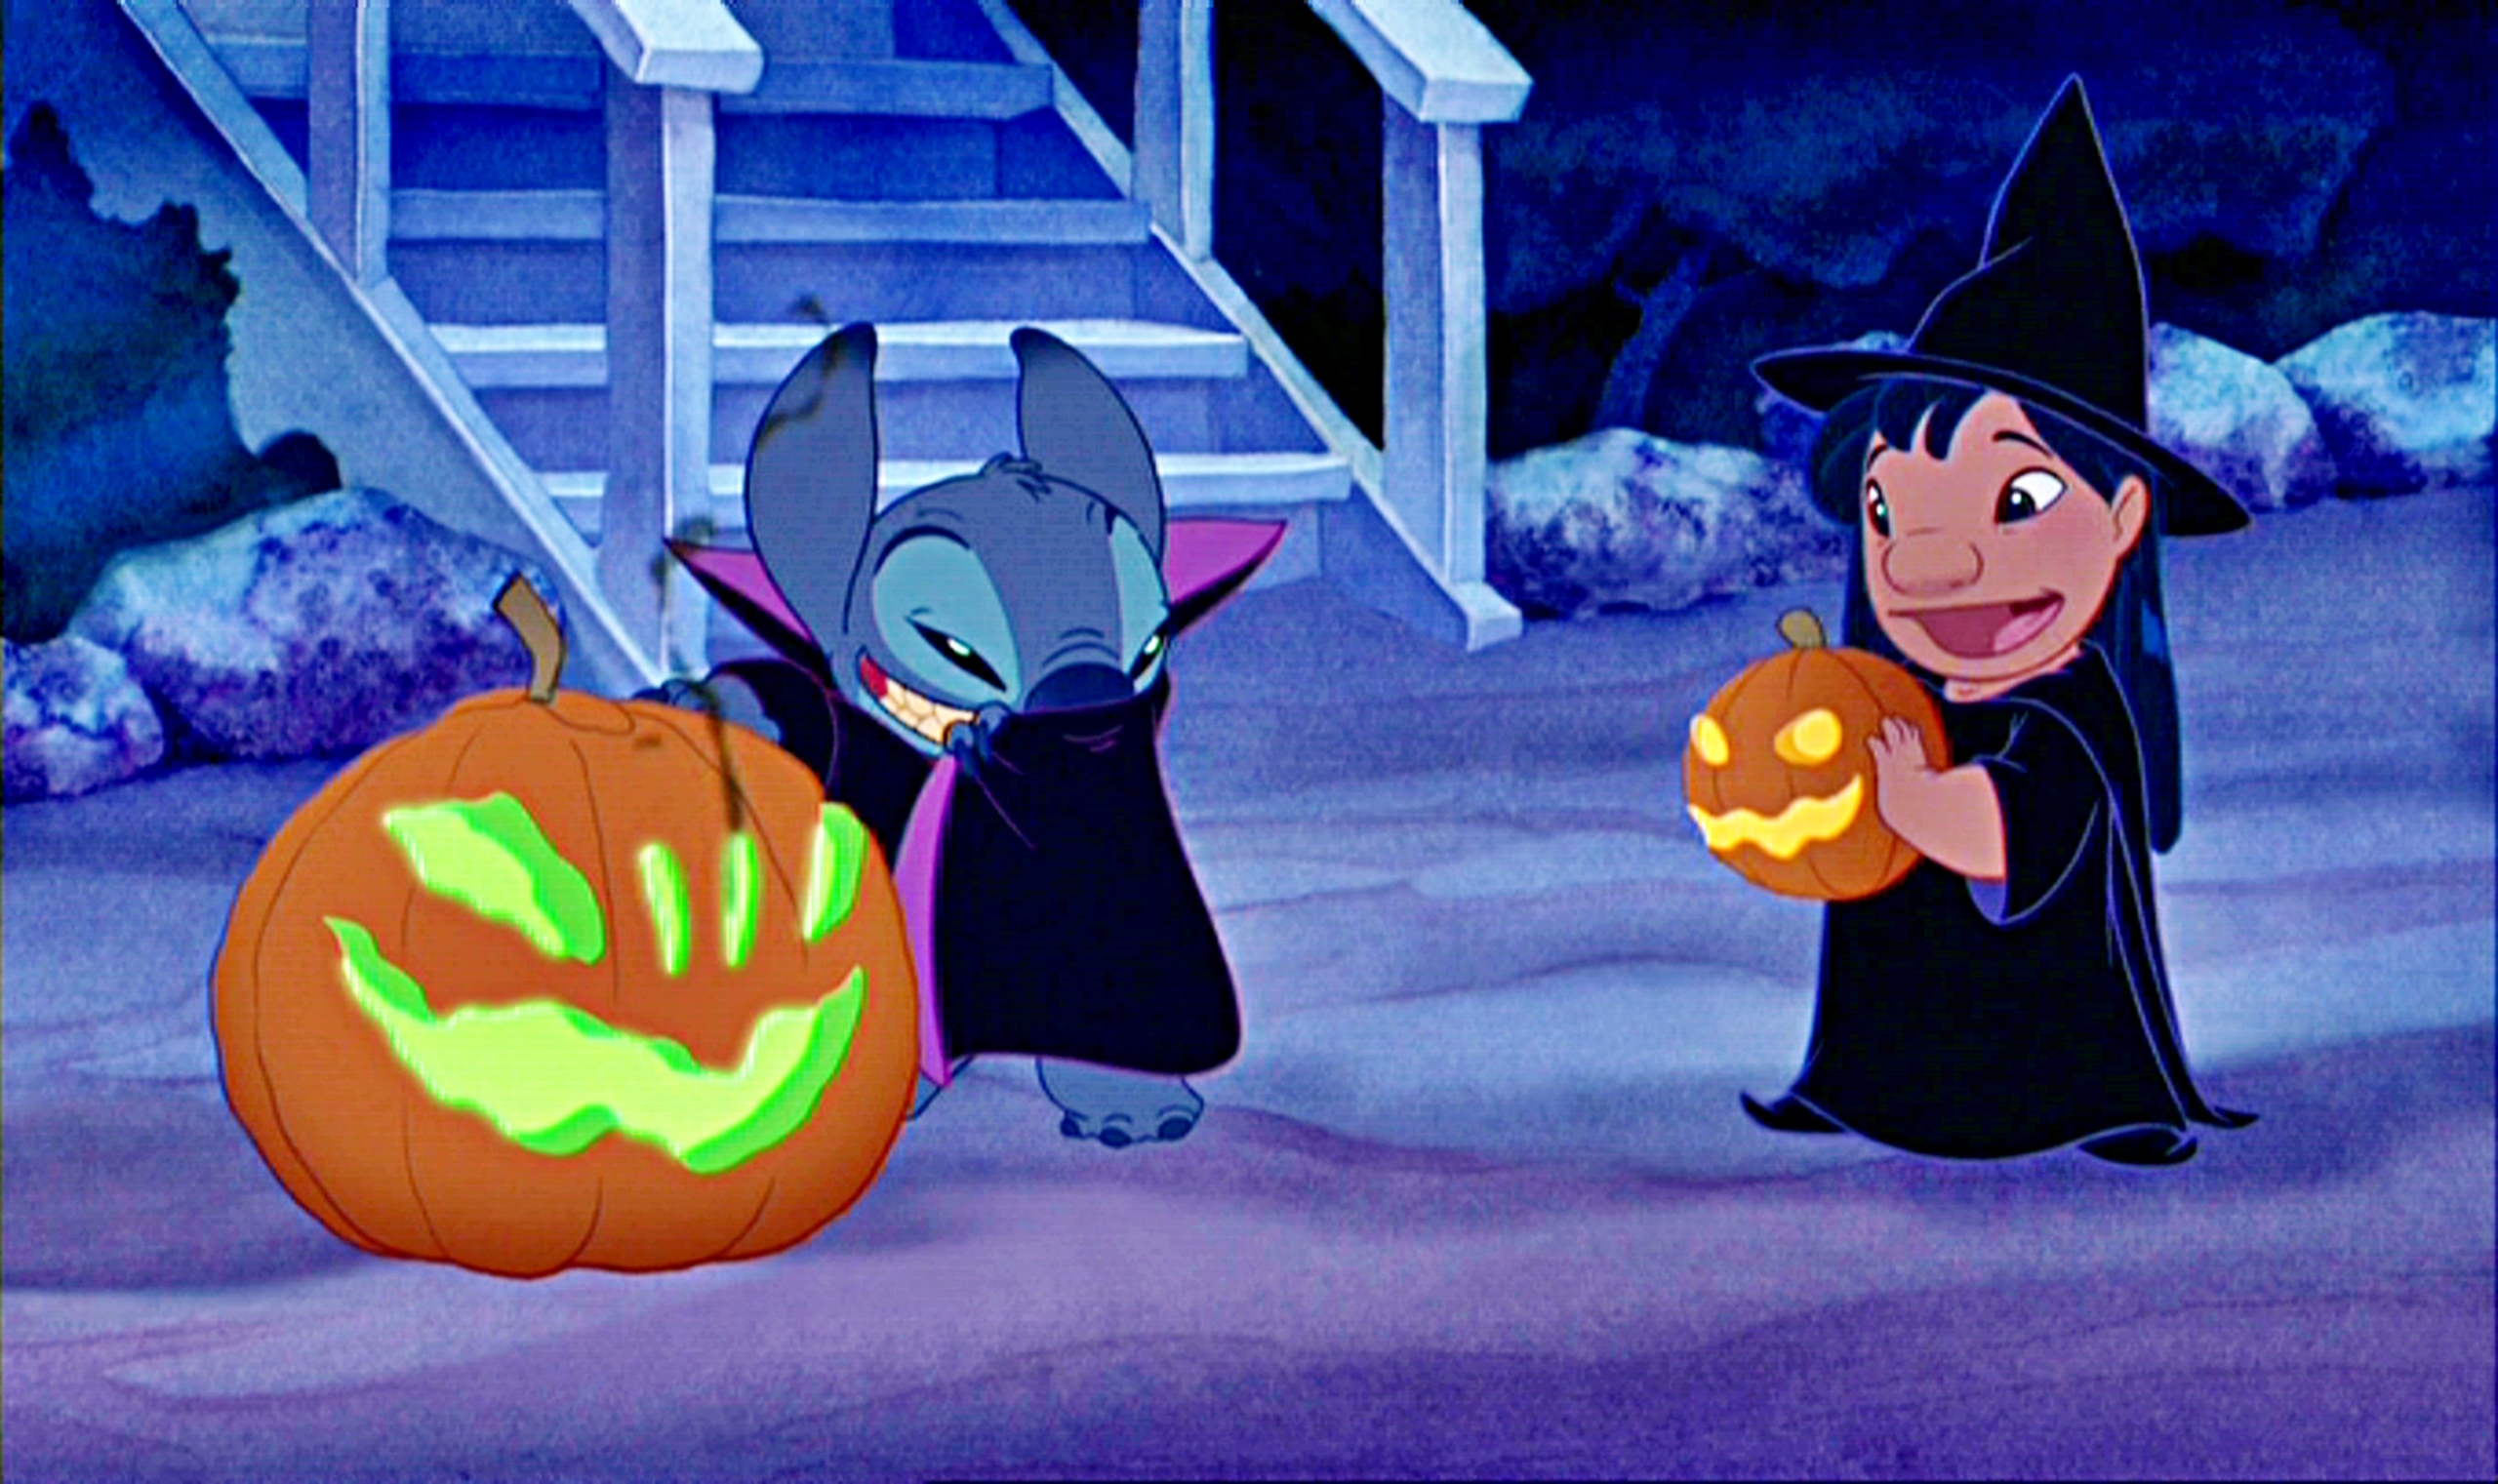  How did you carve your pumpkin this year  halloween pumpkin  pumpkincarving stitch  Lilo and stitch drawings Lilo and stitch Lilo  and stitch characters